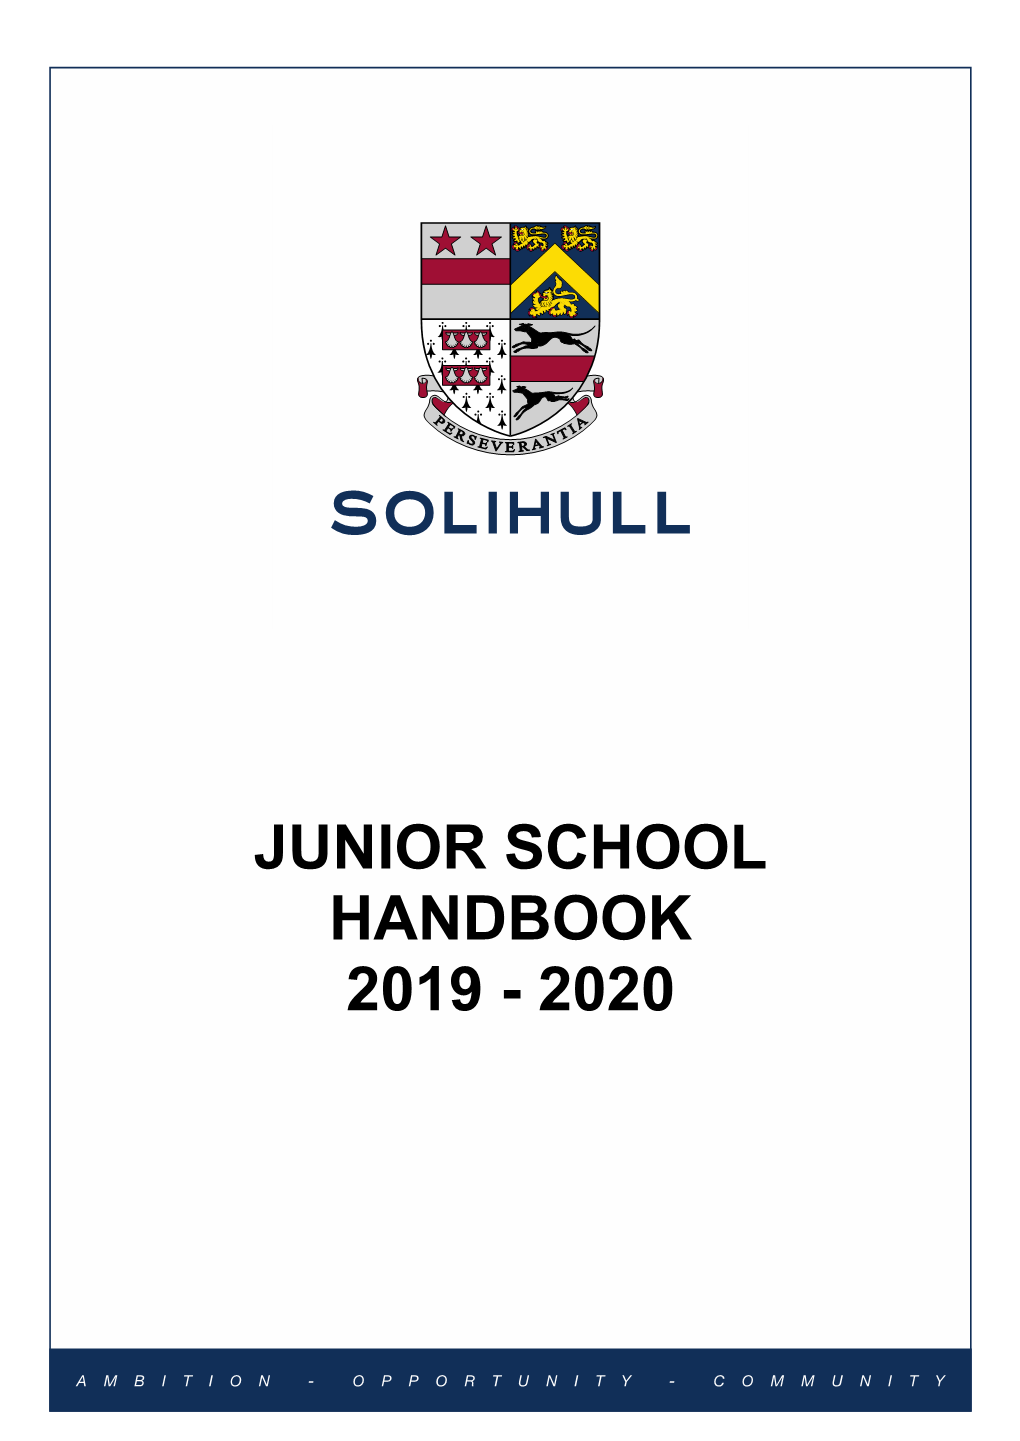 Solihull School Is to Maximise the Potential of All Pupils, Preparing Them for Adult Life As Happy, Charitable, Confident and Intelligent People